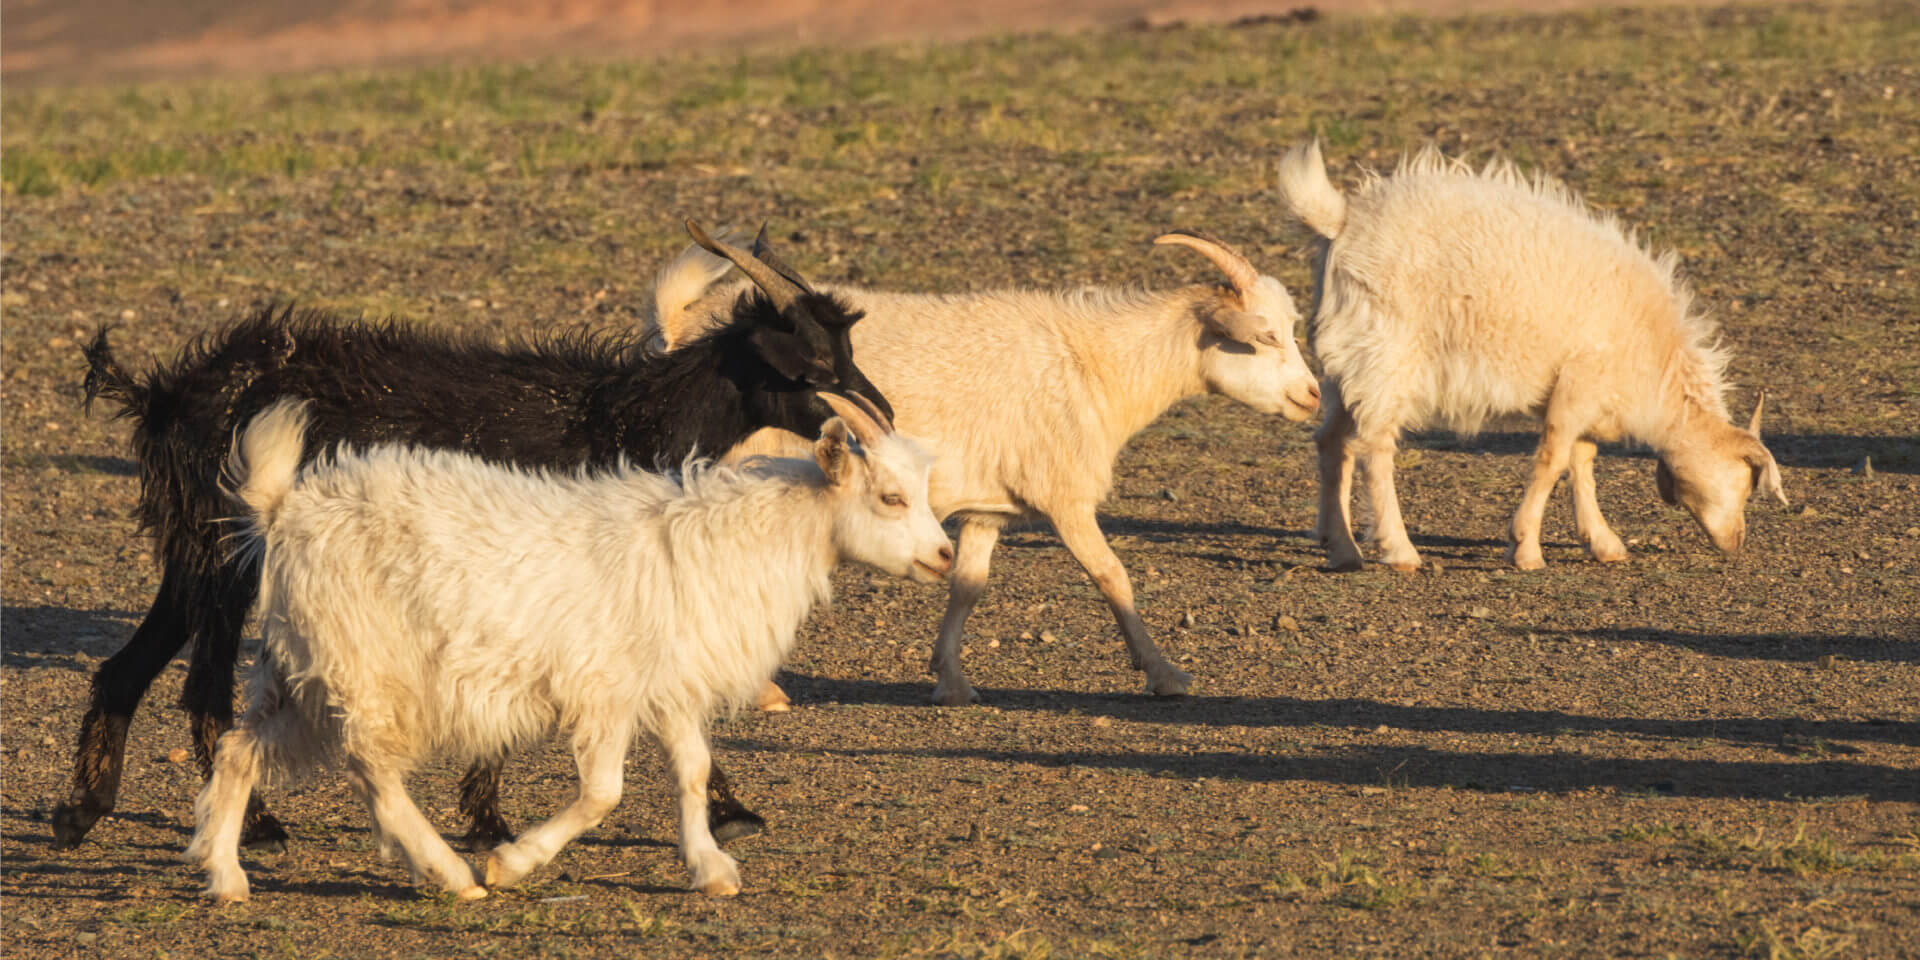 Goats used as a tool to help clear brush, prevent wildfires in Western U.S.